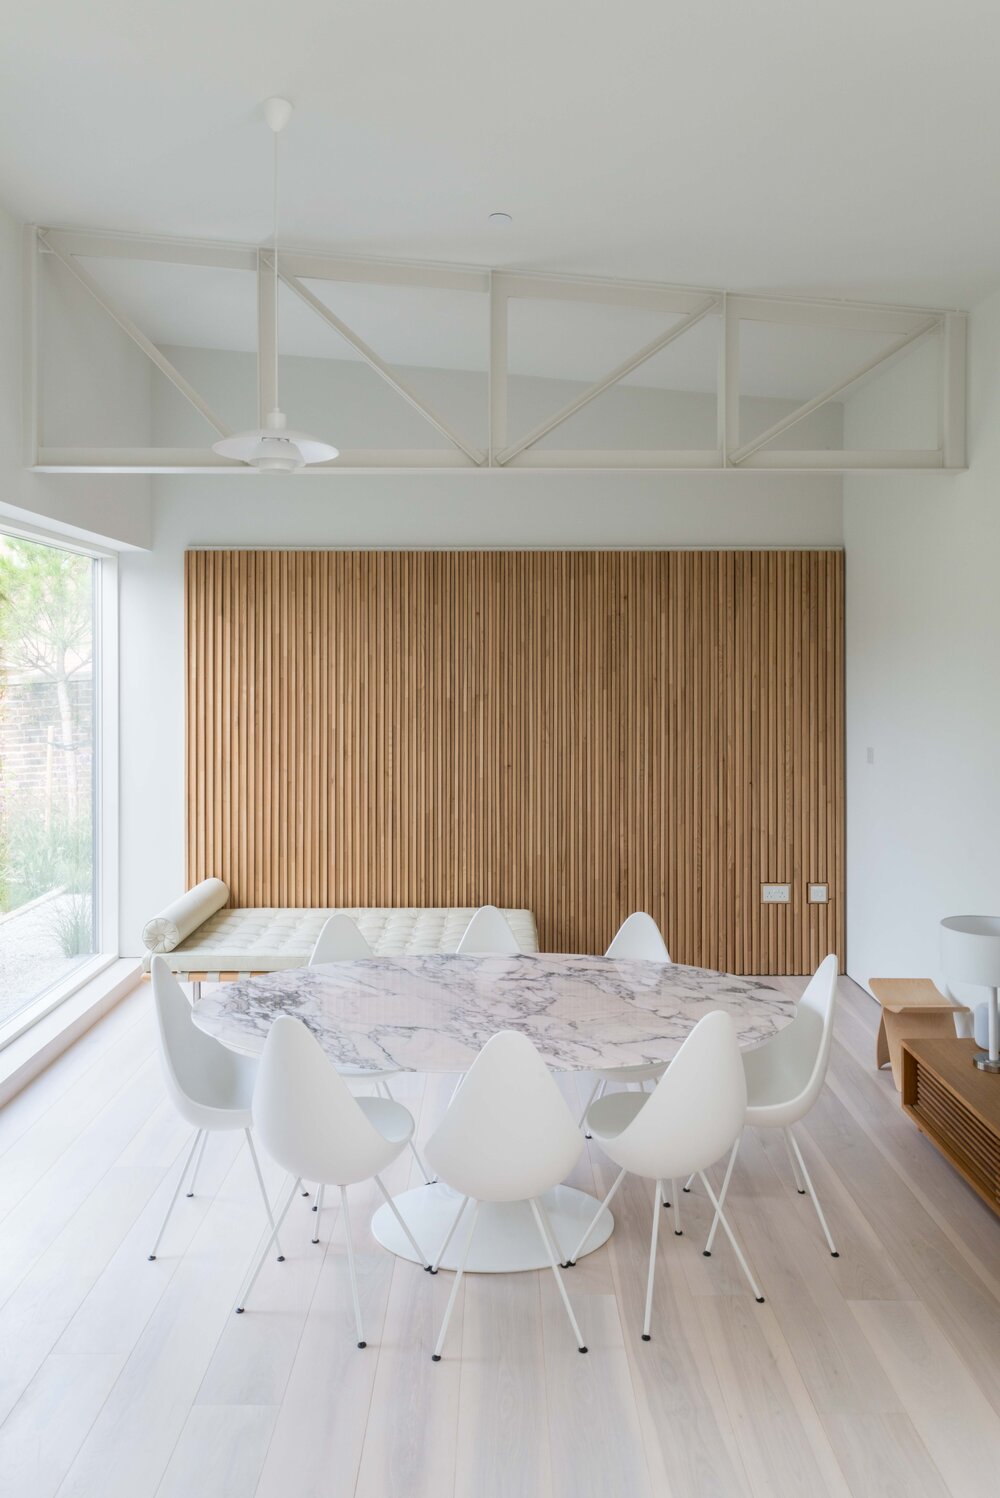 Hove House by Turner Works Architects